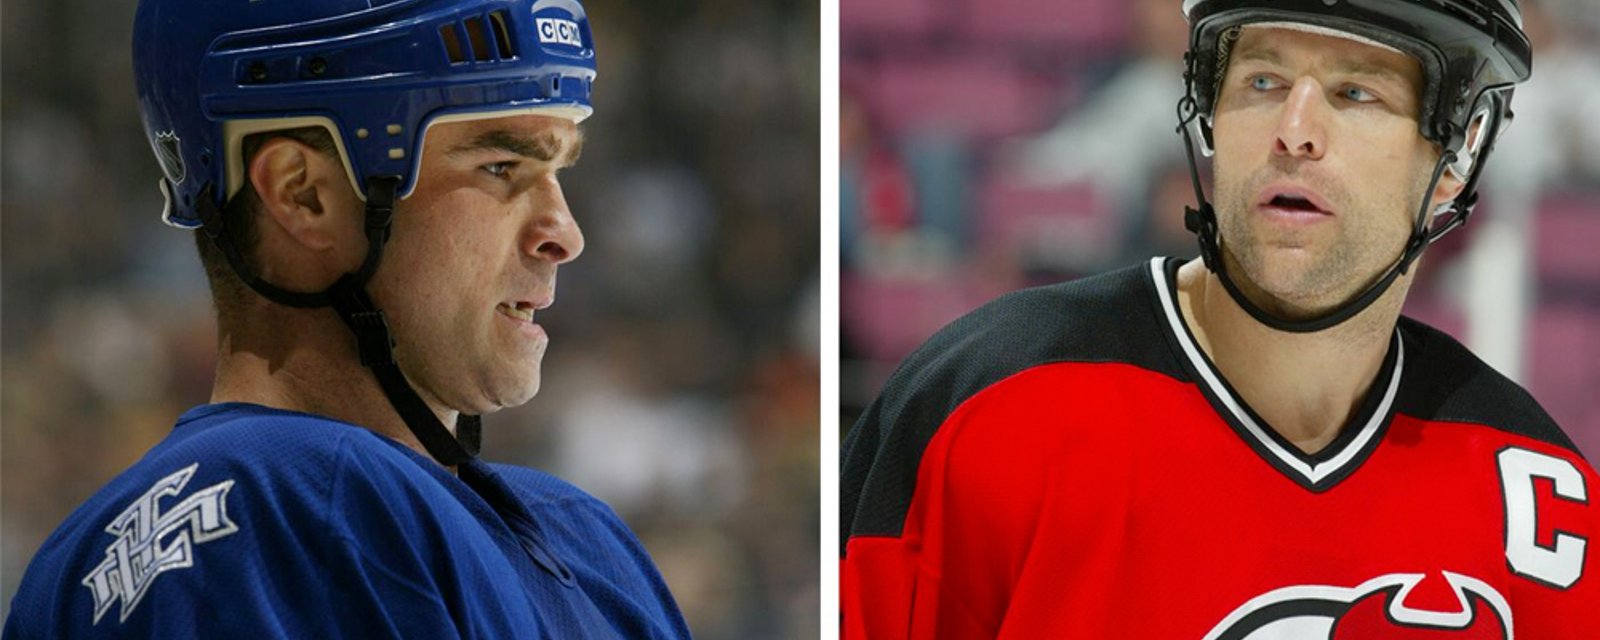 Tie Domi: “Scott Stevens was the biggest phony I ever played against”